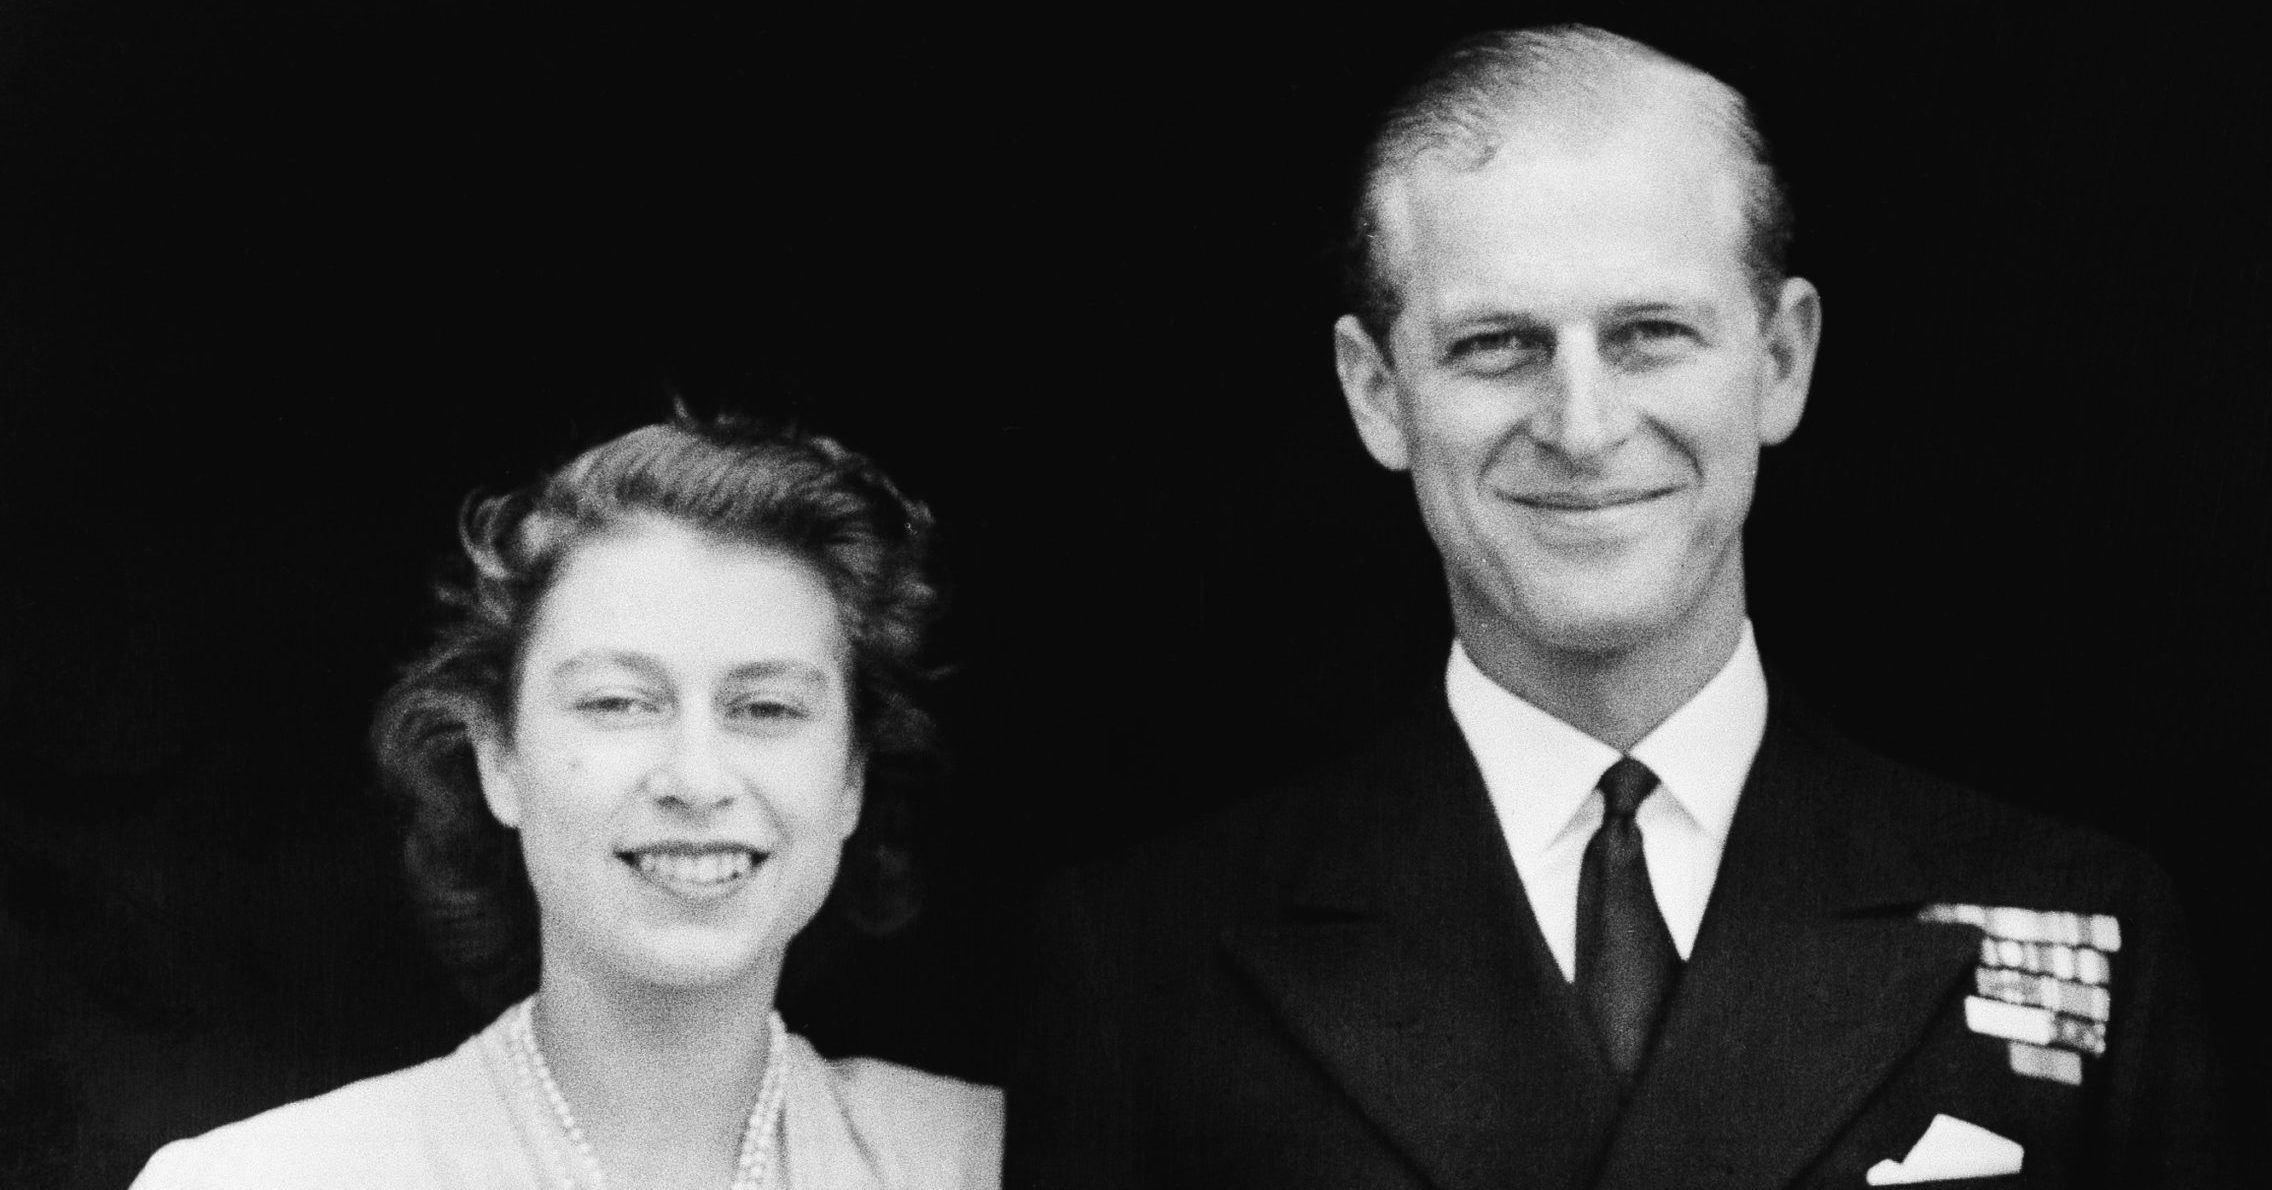 Britain's Princess Elizabeth and her fiance, Lt. Philip Mountbatten, are seen in London on July 10, 1947.